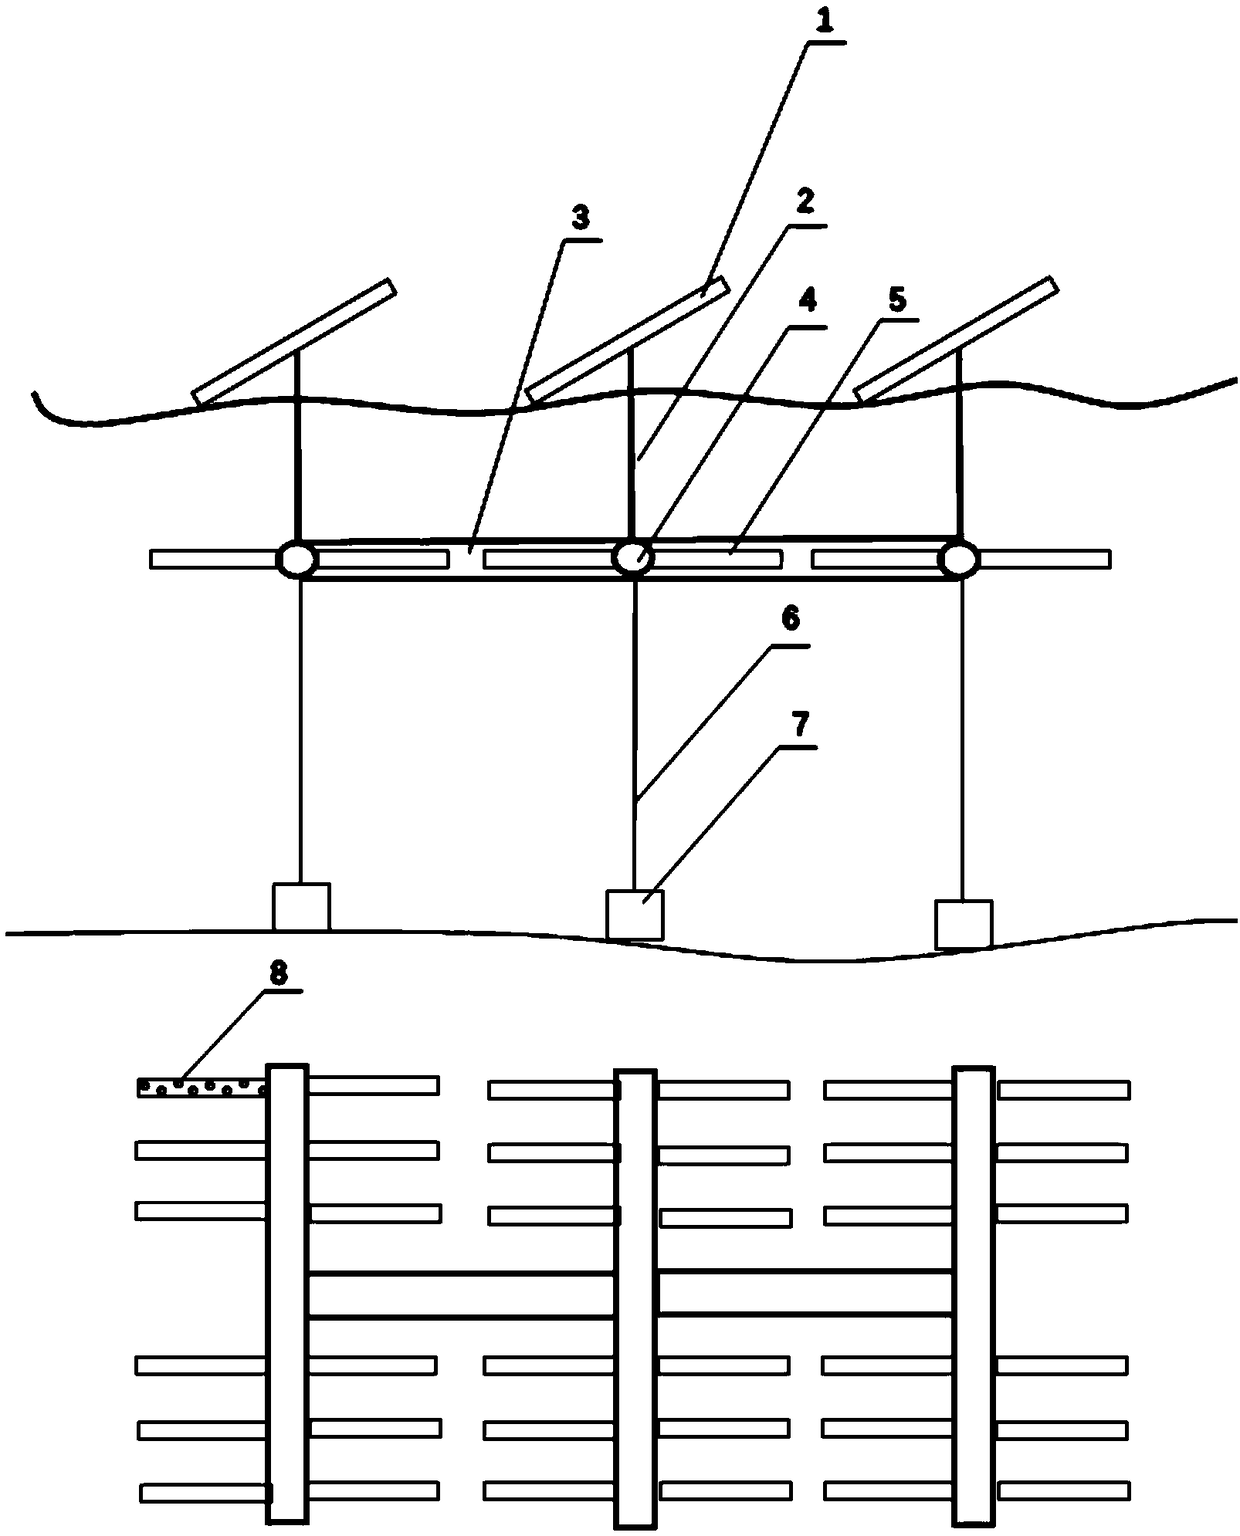 Fishing light complementation system with microporous aeration device